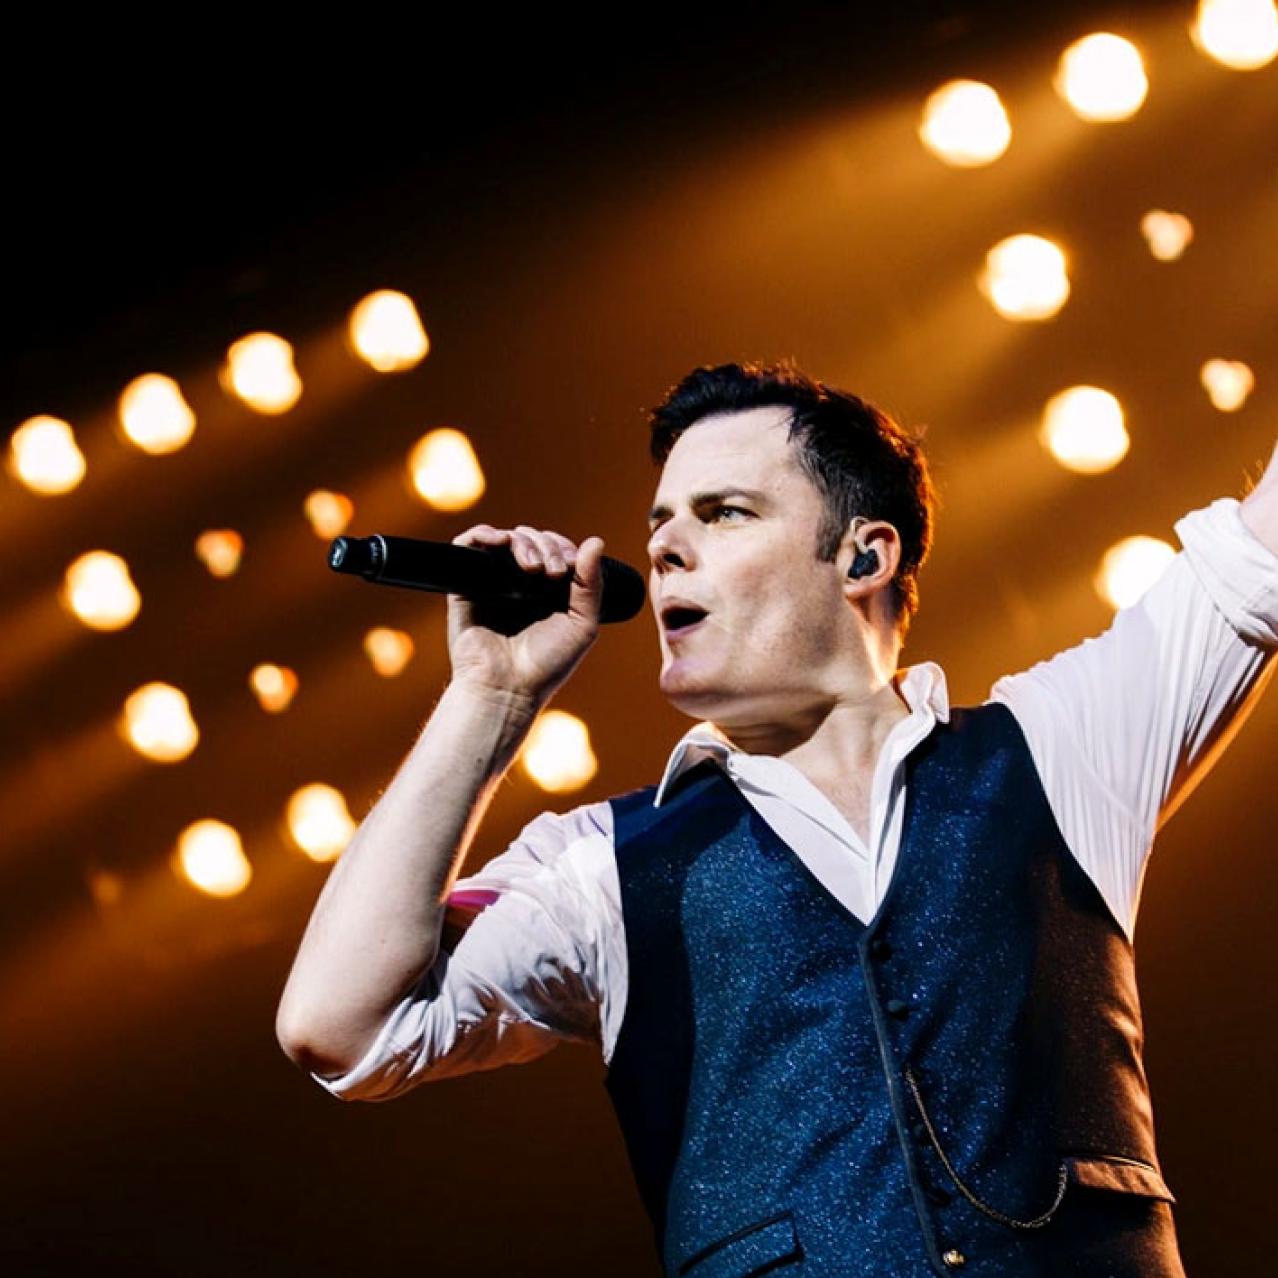 One Vision of Queen featuring Marc Martel